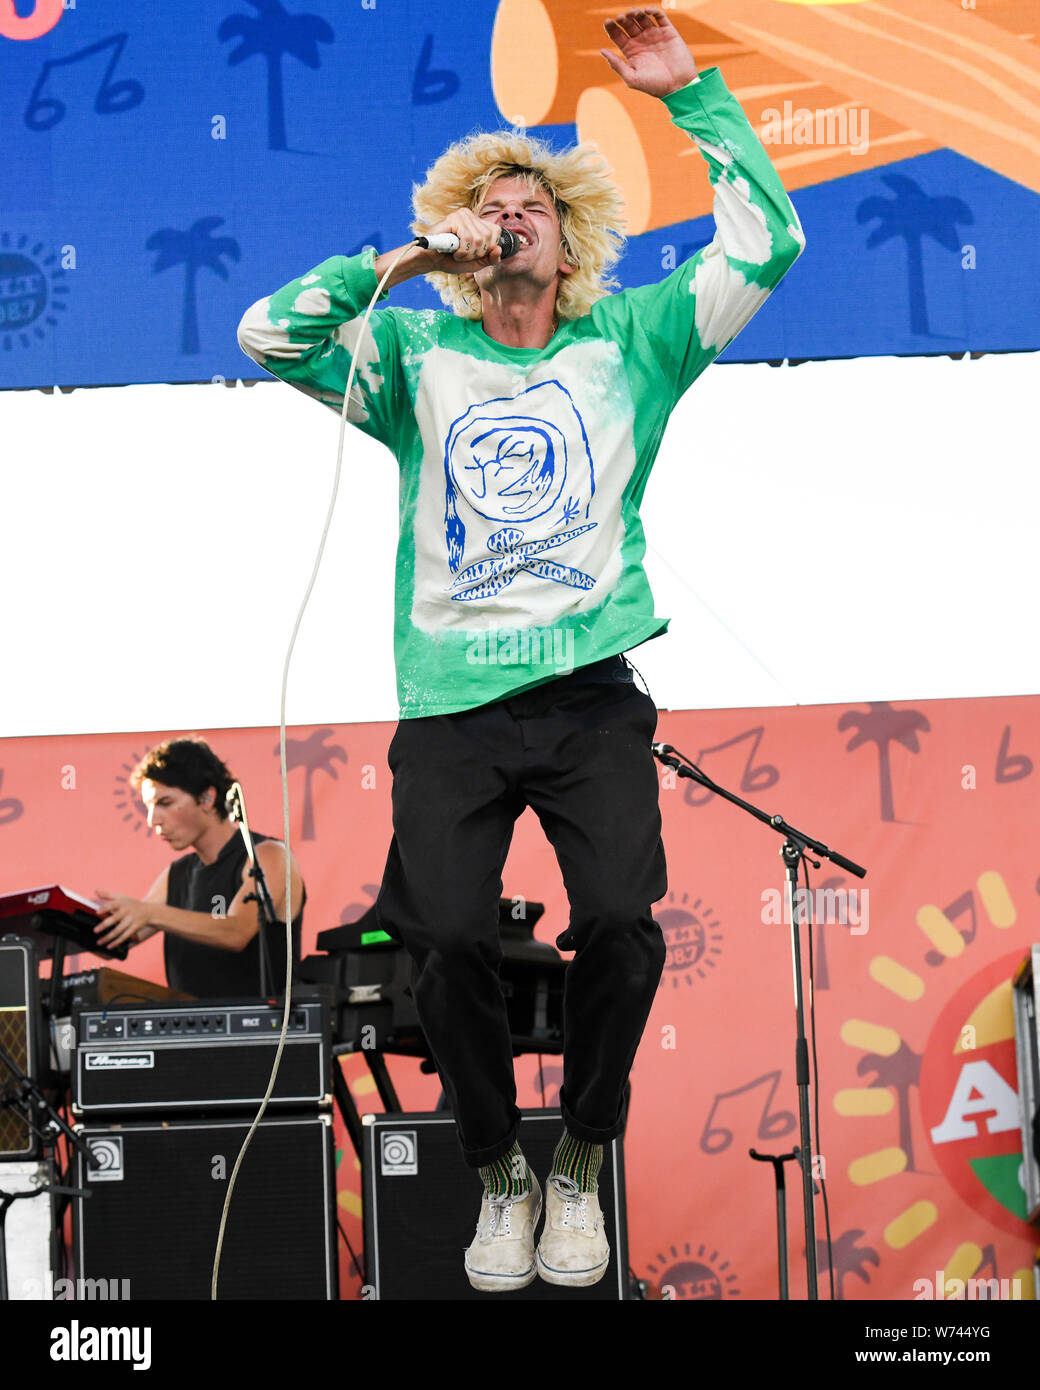 Long Beach, California, USA. 3rd Aug 2019. Christian Zucconi of the band Grouplove performs at ALT 98.7 Summer Camp at the Queen Mary in Long Beach on August 3, 2019. Credit: The Photo Access/Alamy Live News Stock Photo